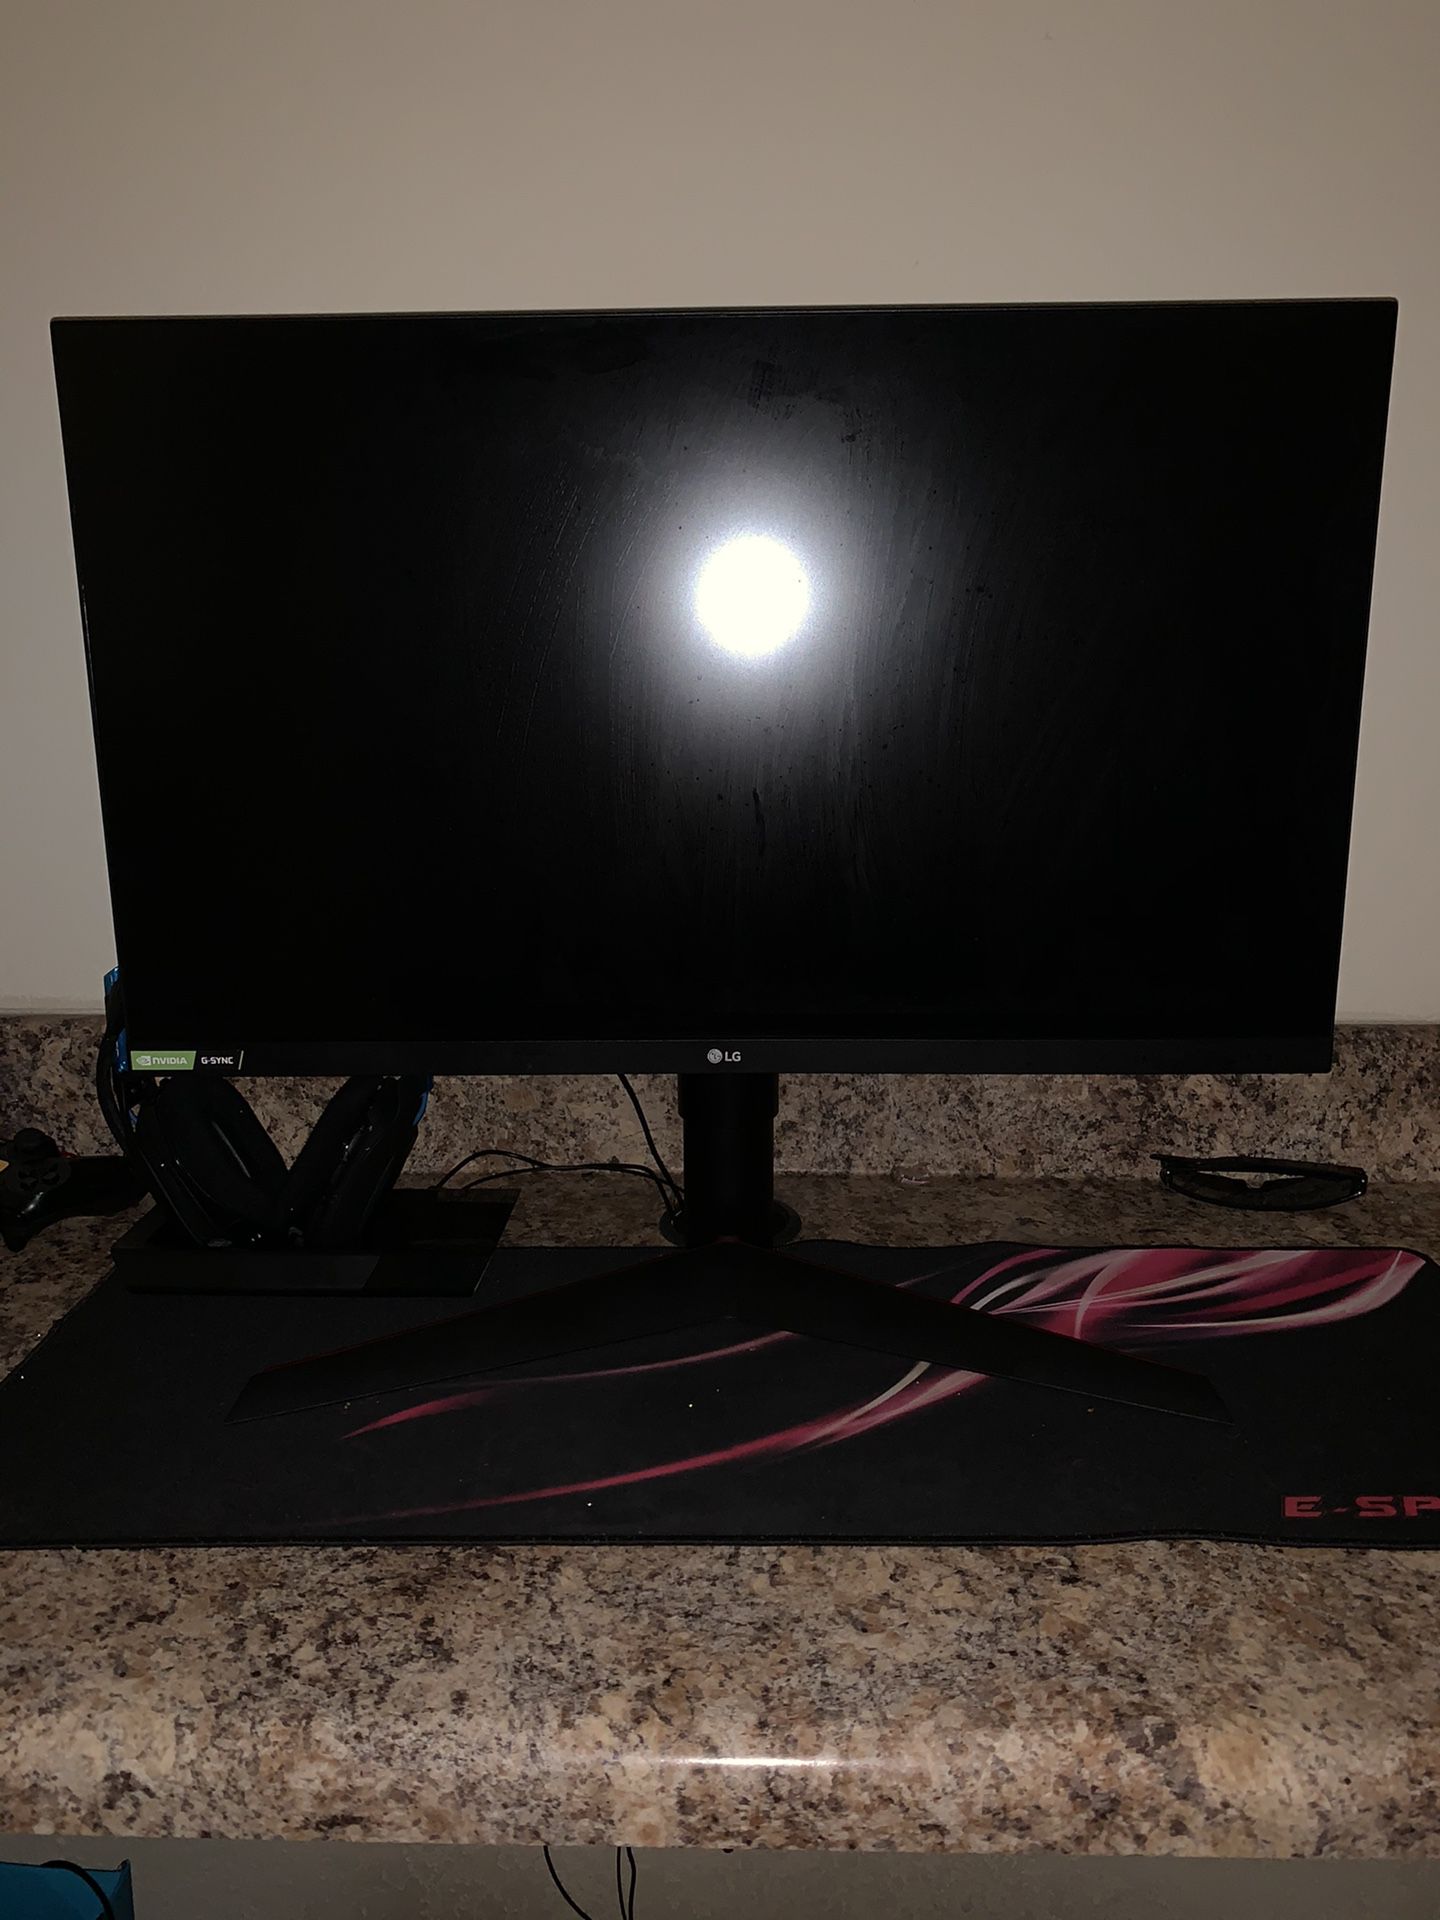 LG 27GL63T Ultragear 27" Class FHD IPS G-Sync Compatible Gaming Monitor 144hz, 1ms Response Time, 1080p.